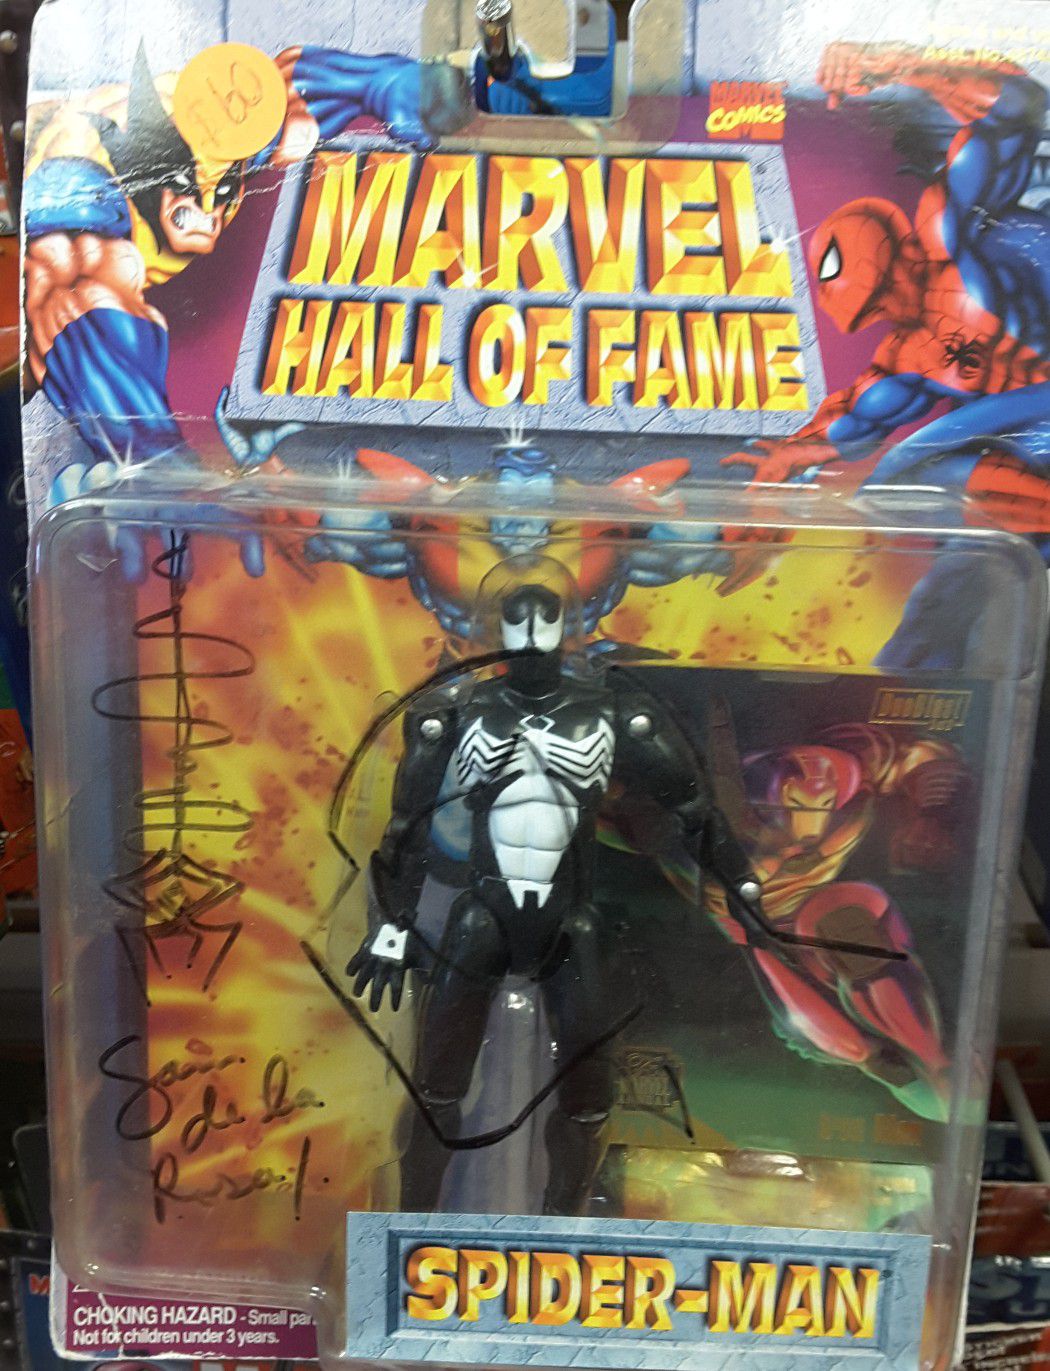 Autographed collectible toys